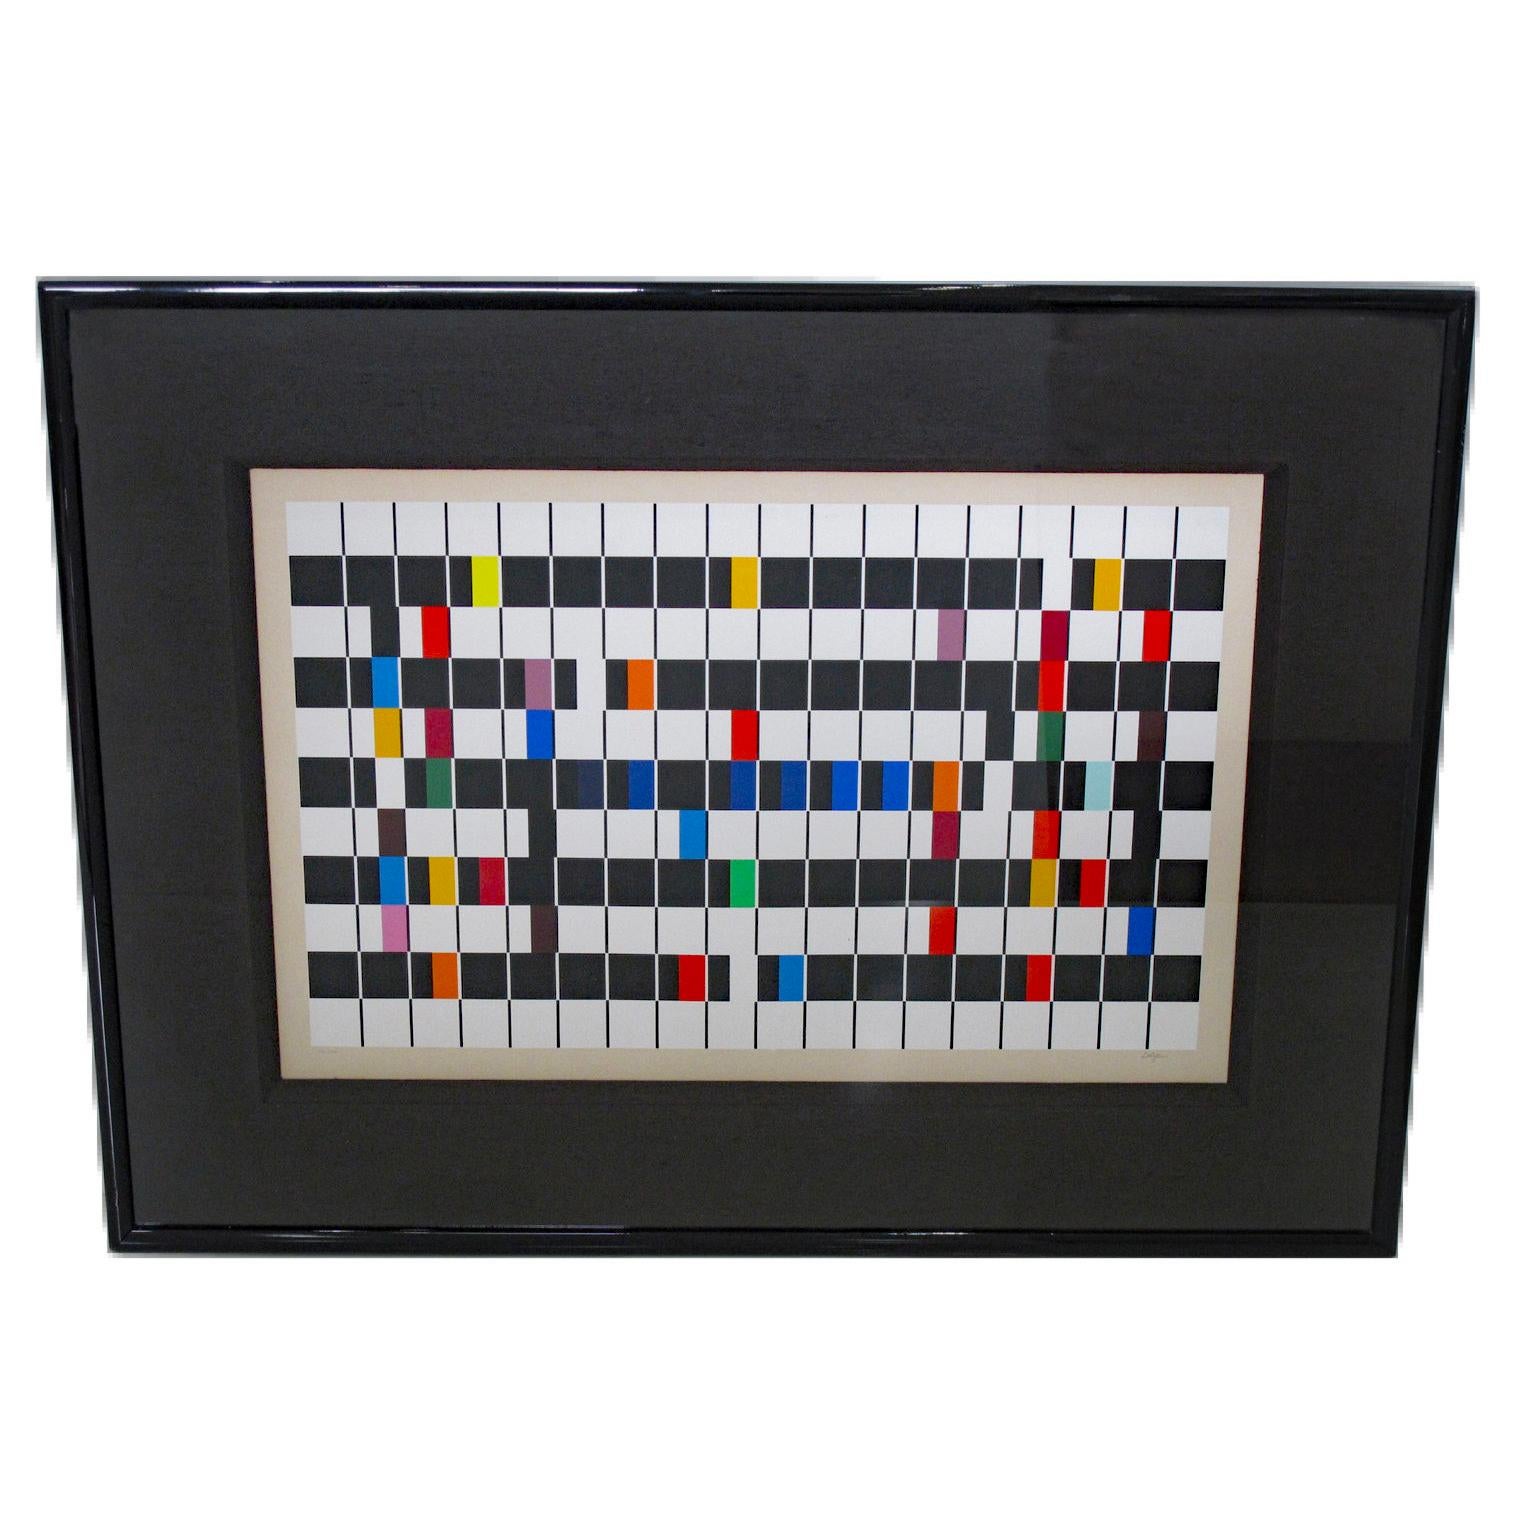 One and Another - Kinetic Op Art Serigraph Signed & Numbered by Yaacov Agam 4